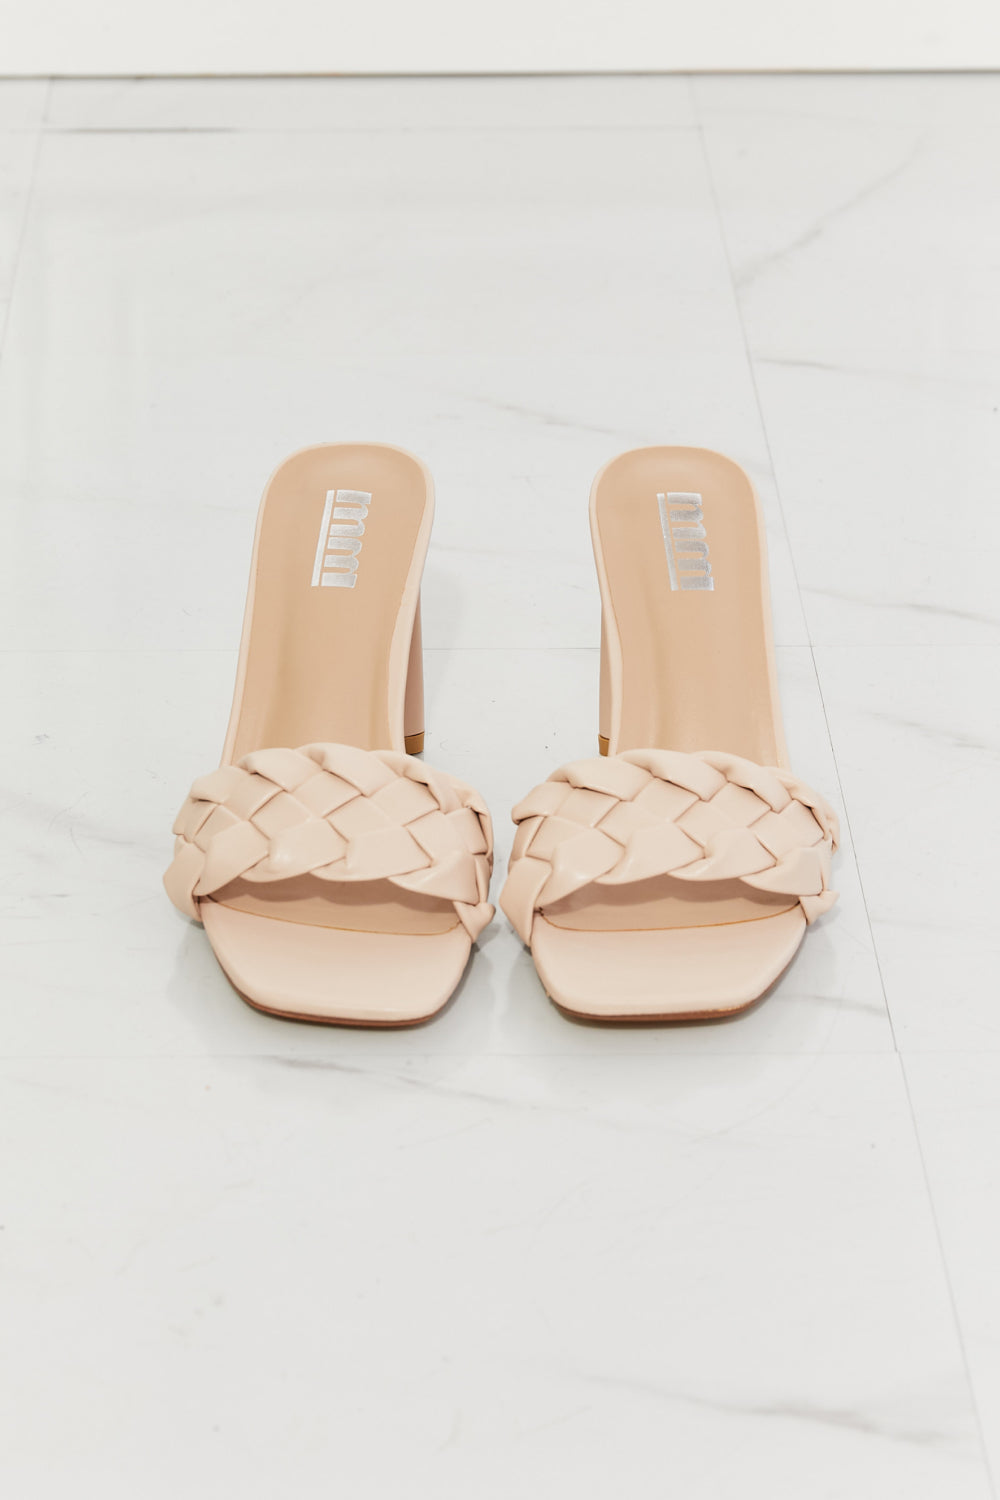 MMShoes Top of the World Braided Block Heel Sandals in Beige Trendsi